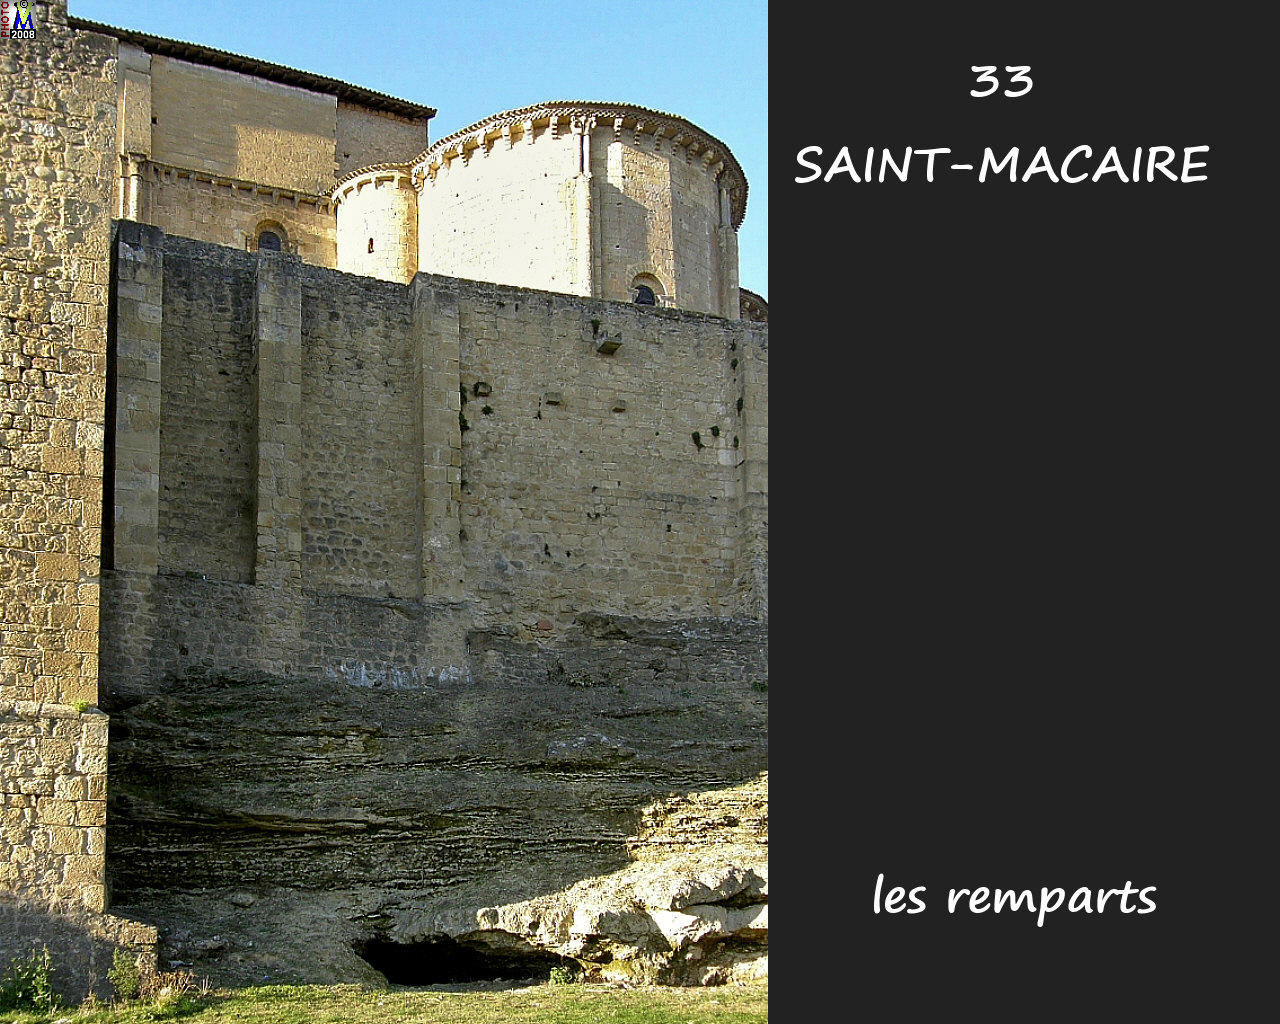 33StMACAIRE_remparts_102.jpg